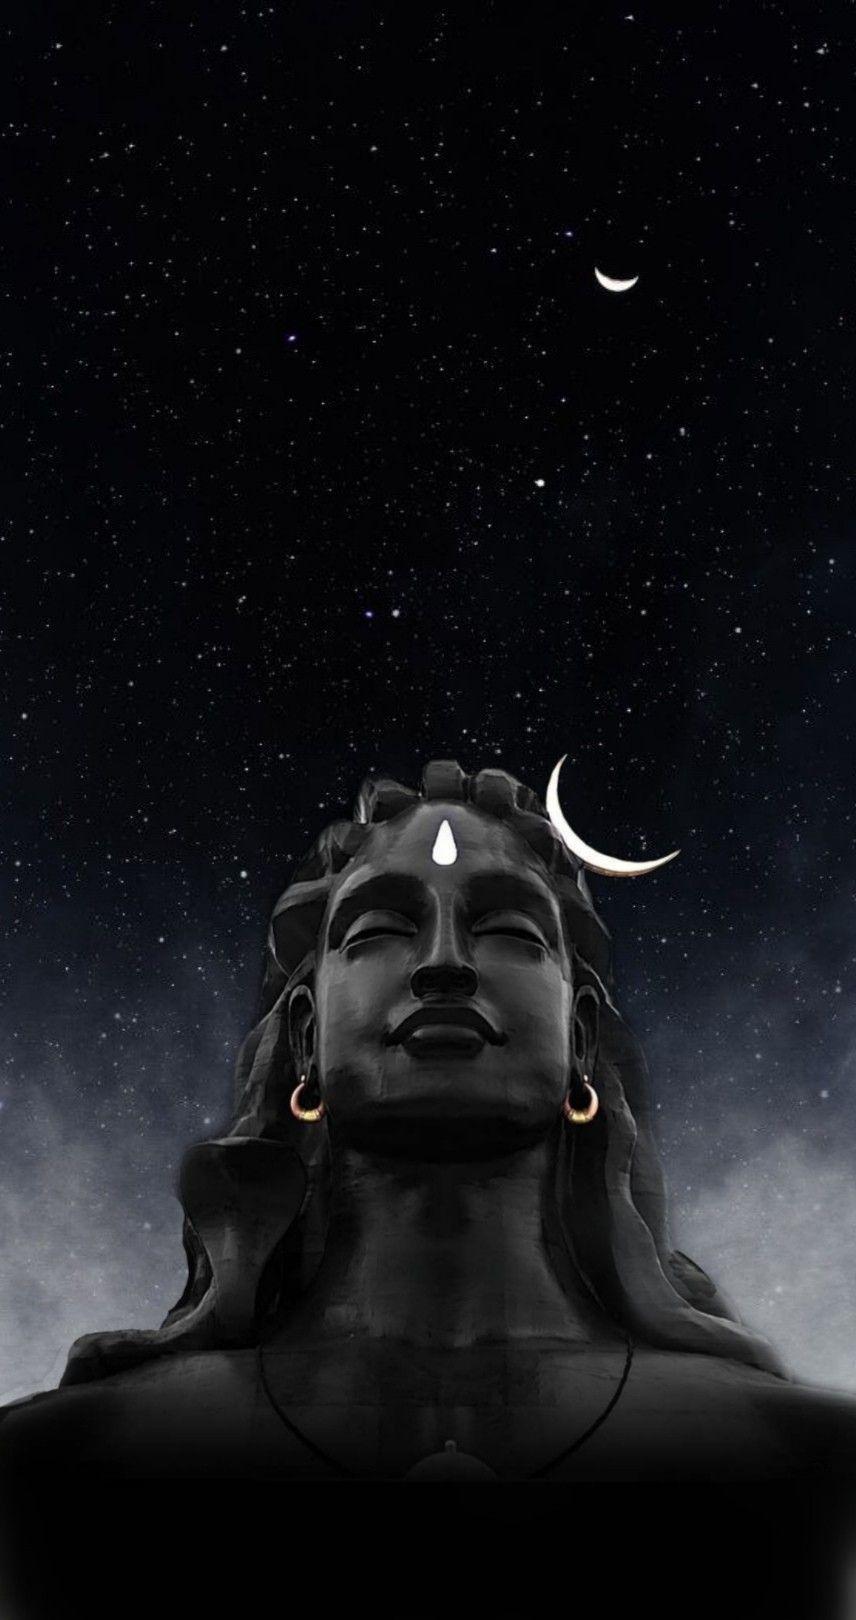 68+ Lord Shiva Wallpapers High Resolution